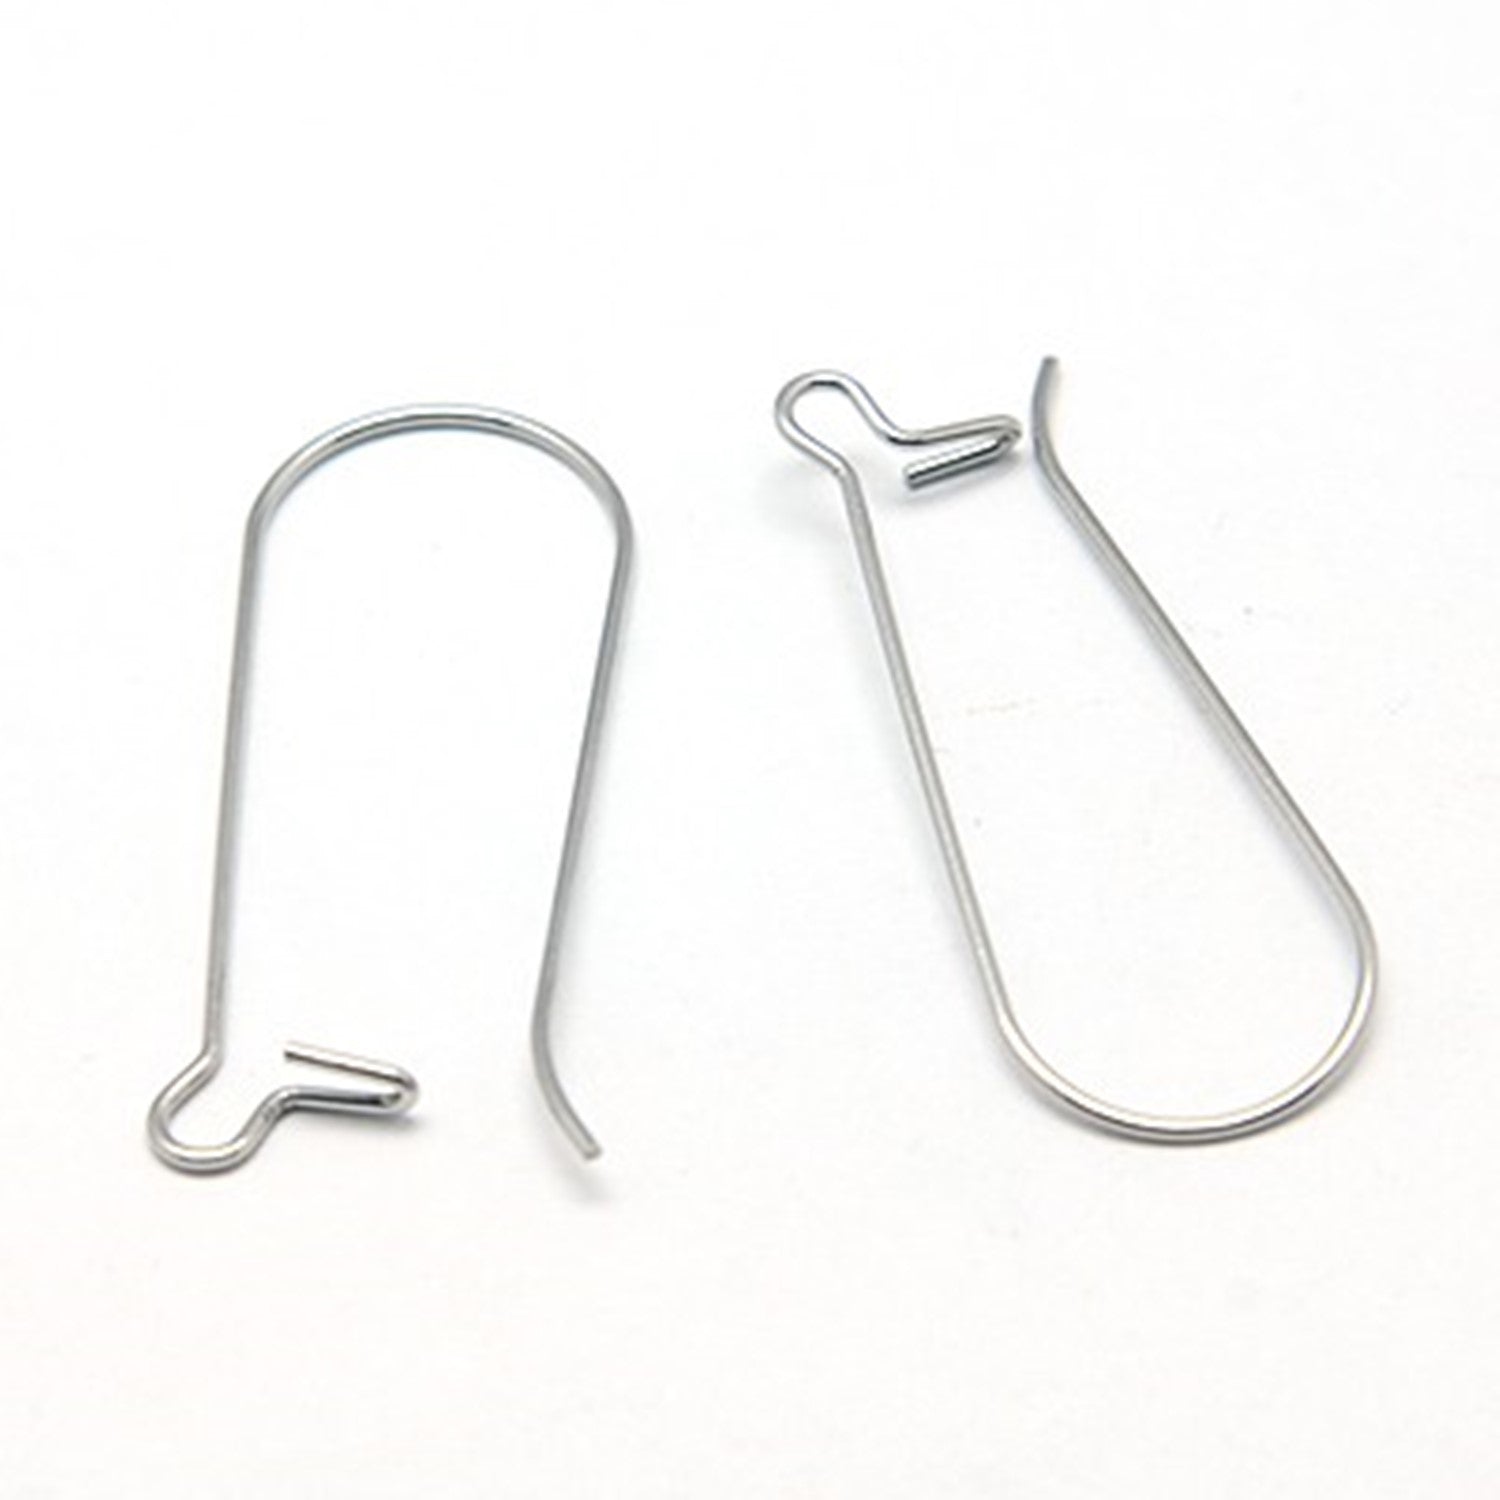 Lever Back Ear Wire, Plain, 13mm, 100 Pieces, #1347 - Jewelry Tool Box